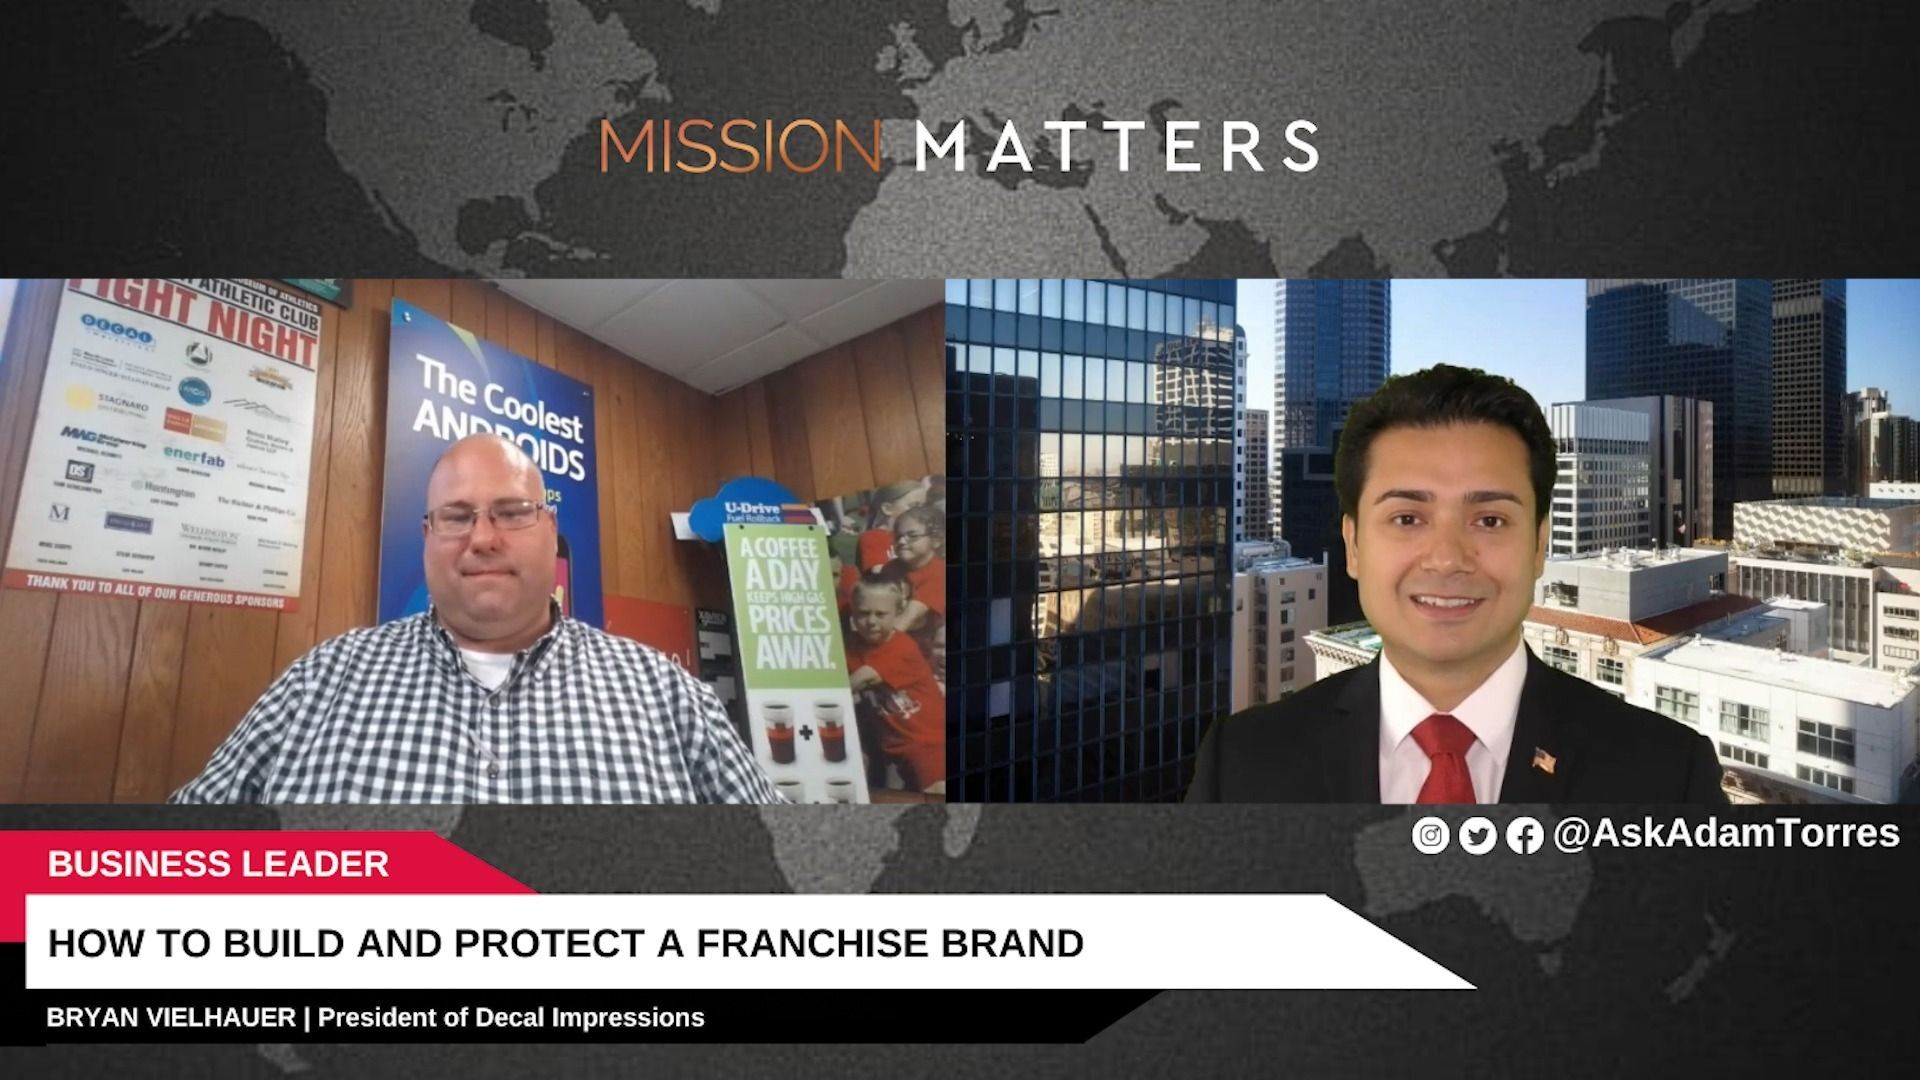 How to Build and Protect a Franchise Brand | Mission Matters | Decal Impressions